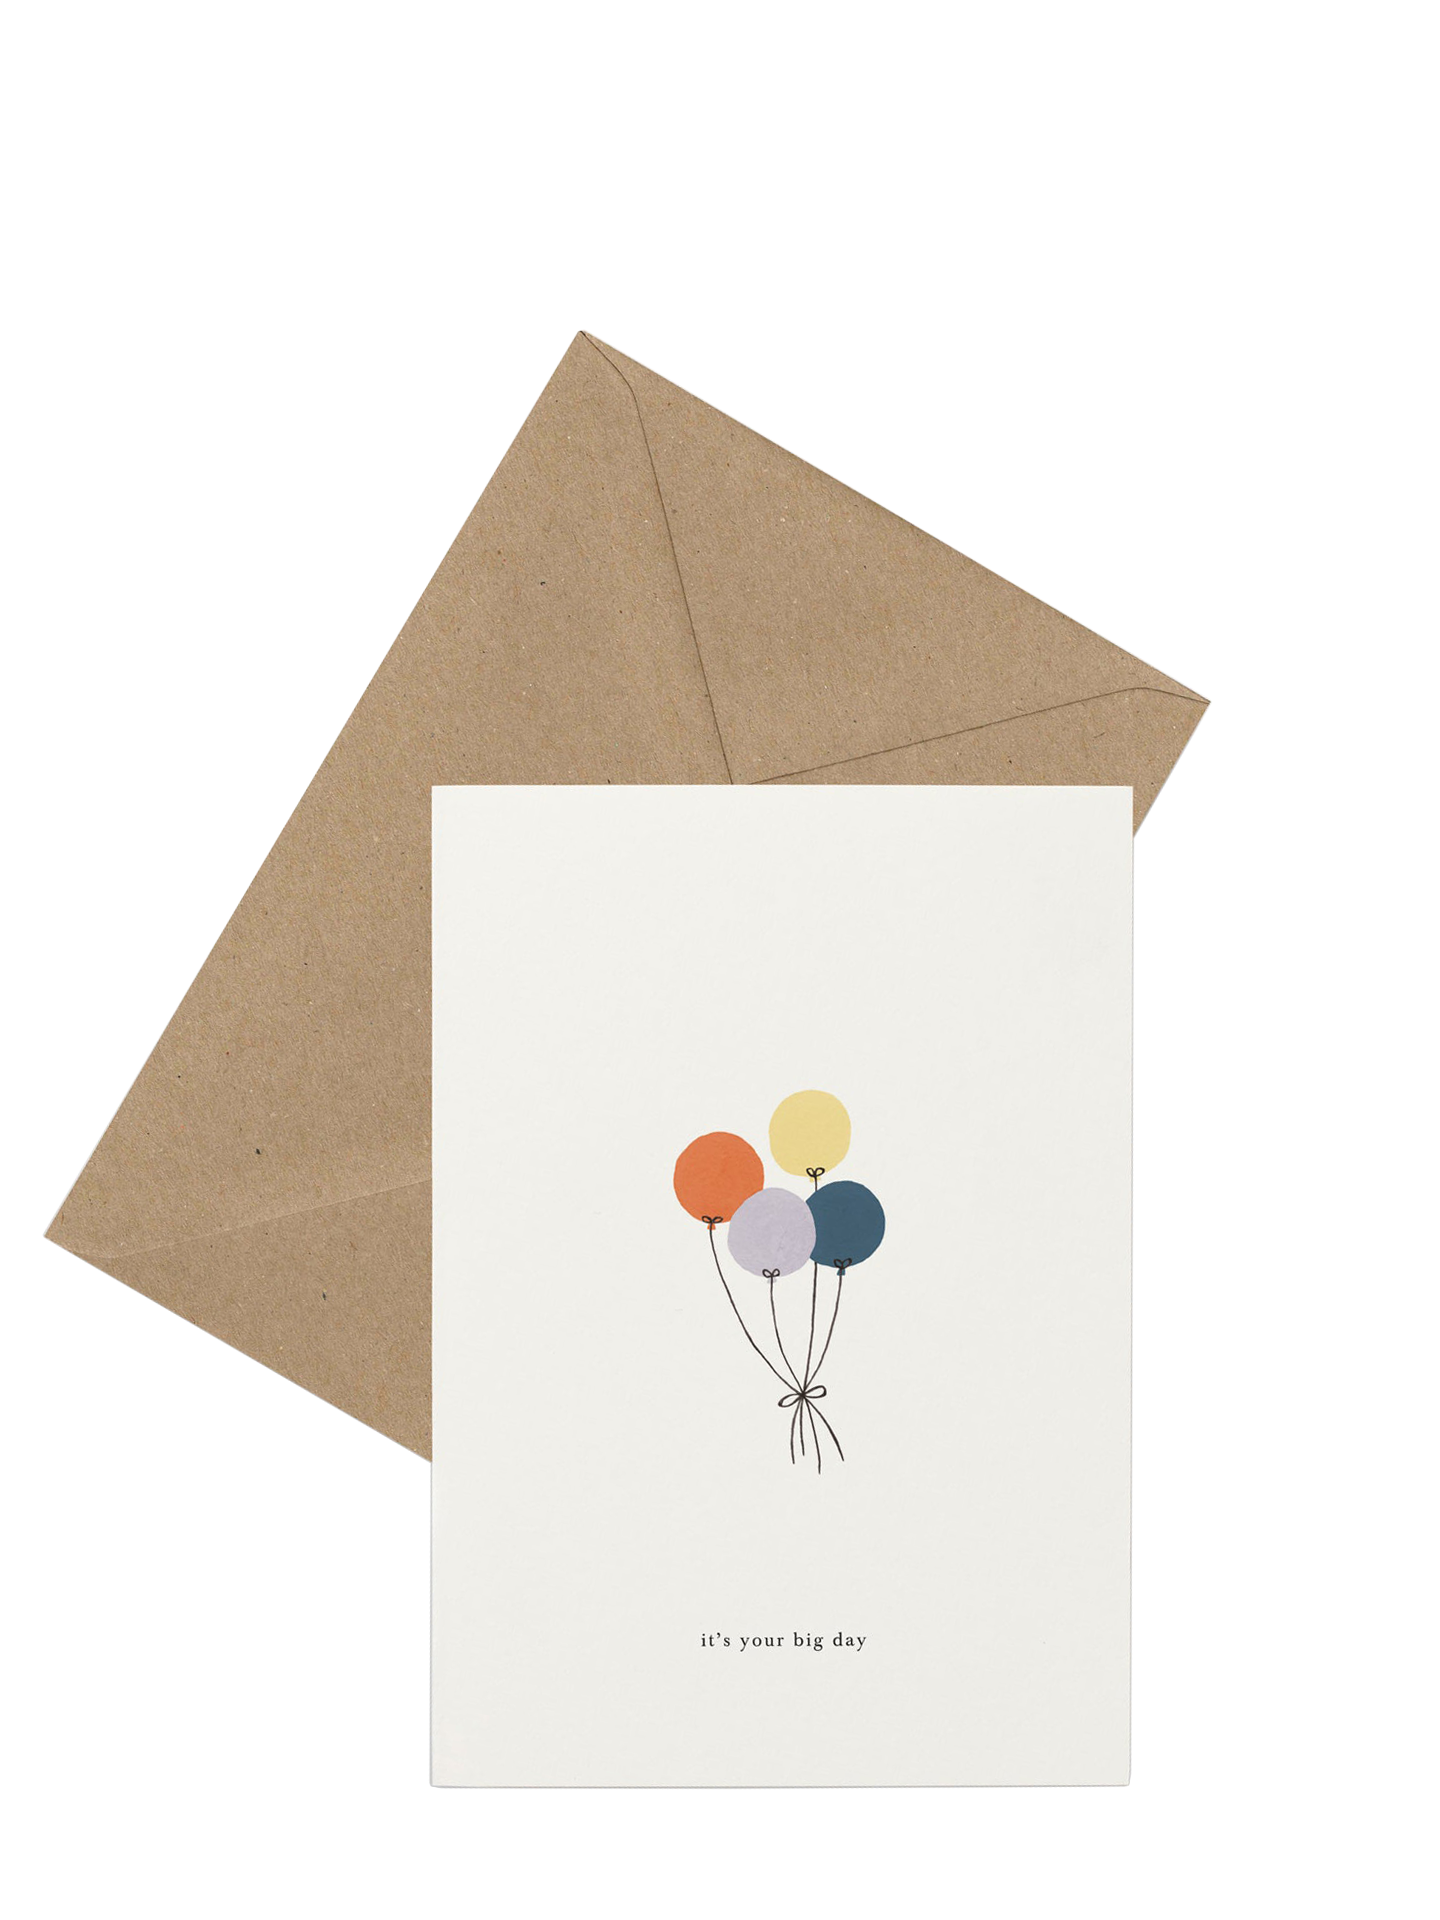 Balloons card (it's your big day) congratulations card